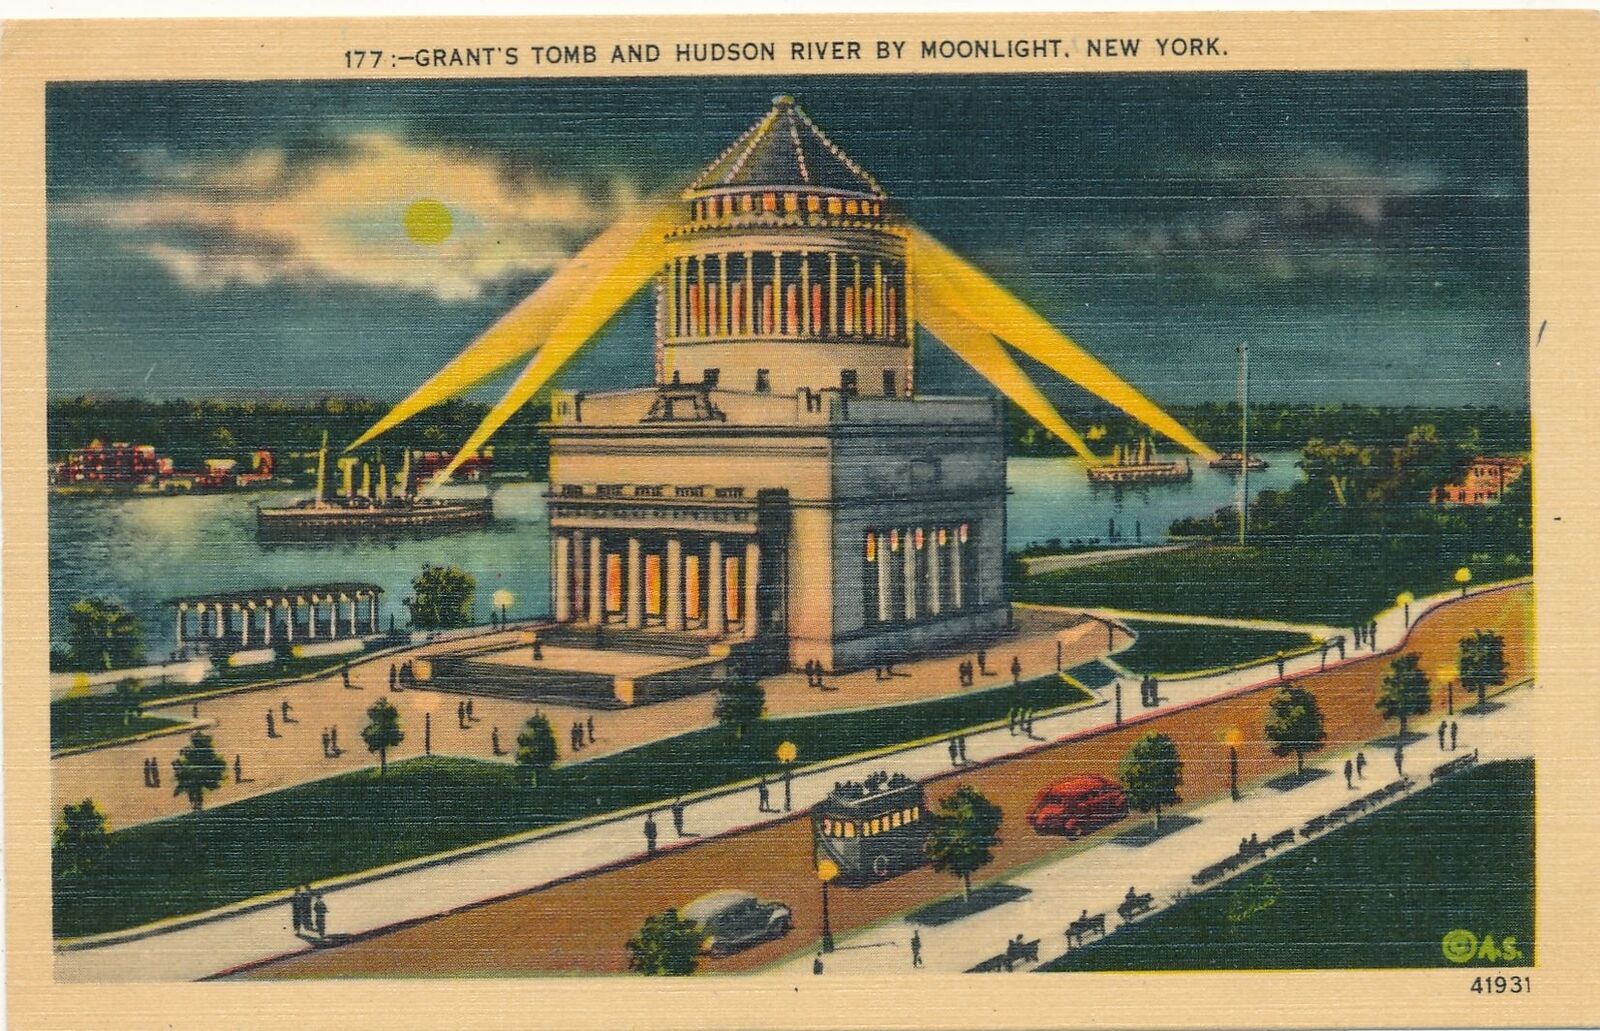 NEW YORK CITY - Grant's Tomb And Hudson River By Moonlight Postcard